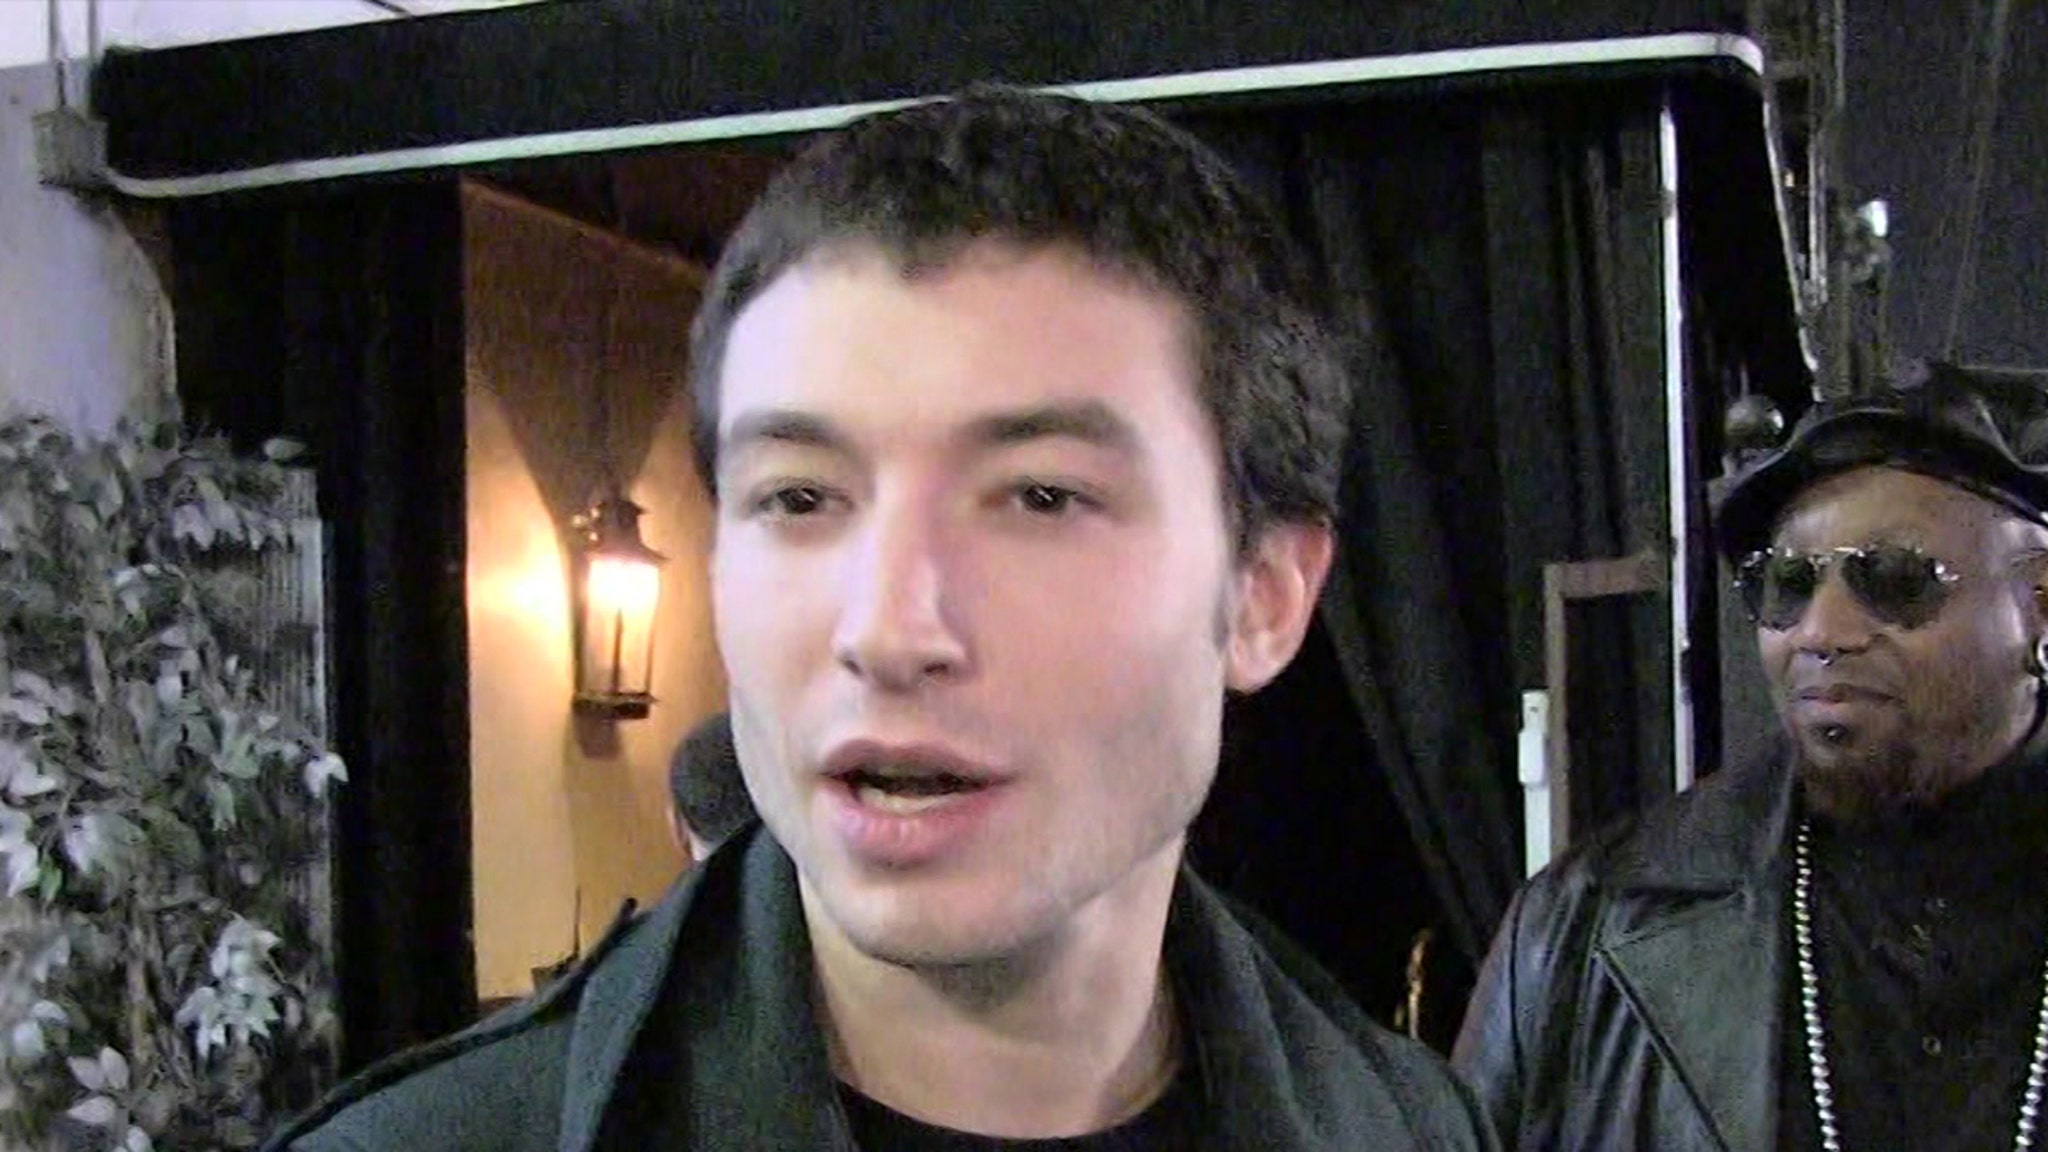 Parents of 18-Year-Old Claim Ezra Miller Groomed Her Want Court Protection – TMZ